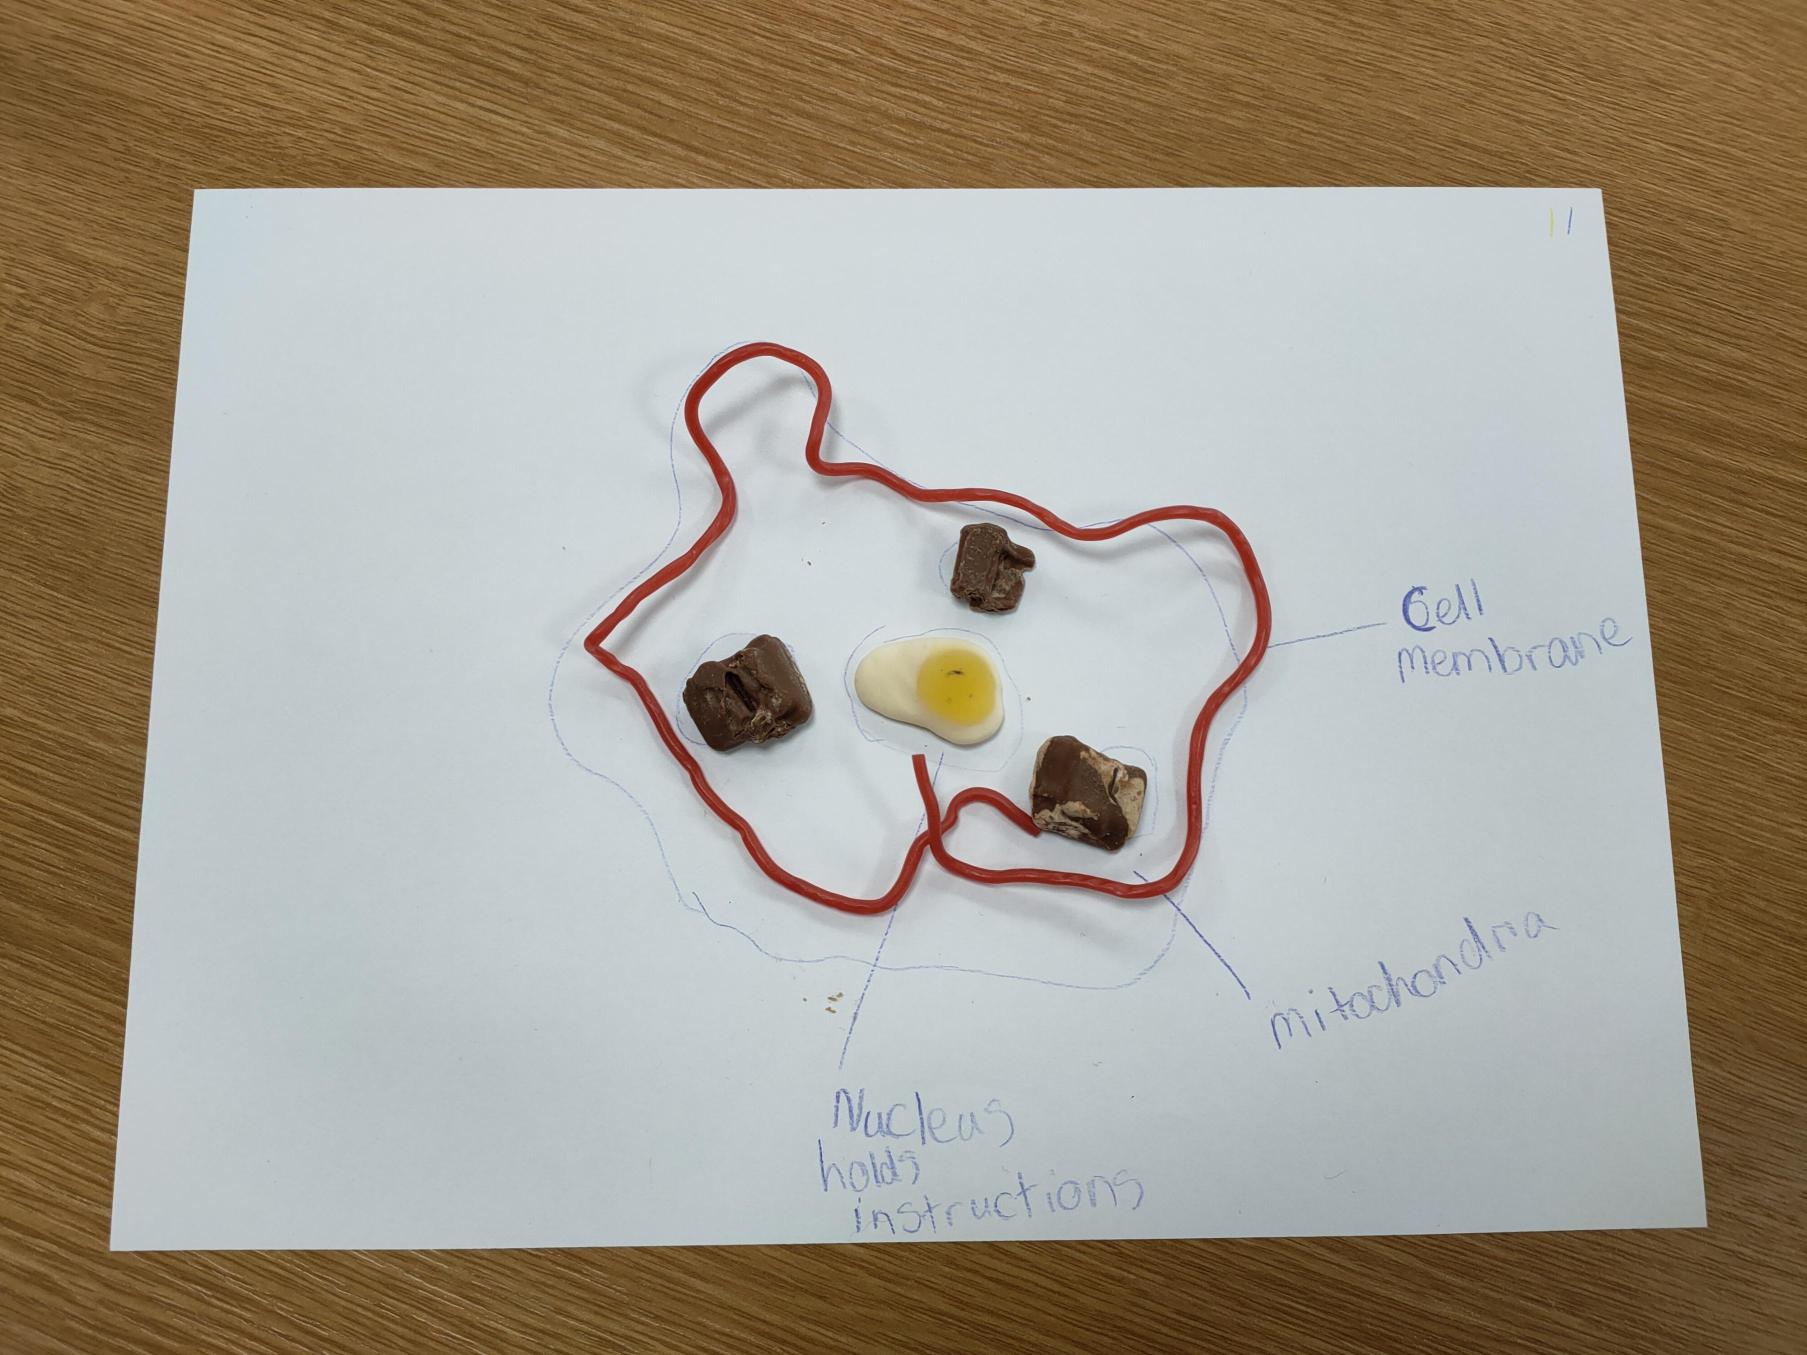 A child's diagram of an animal cell